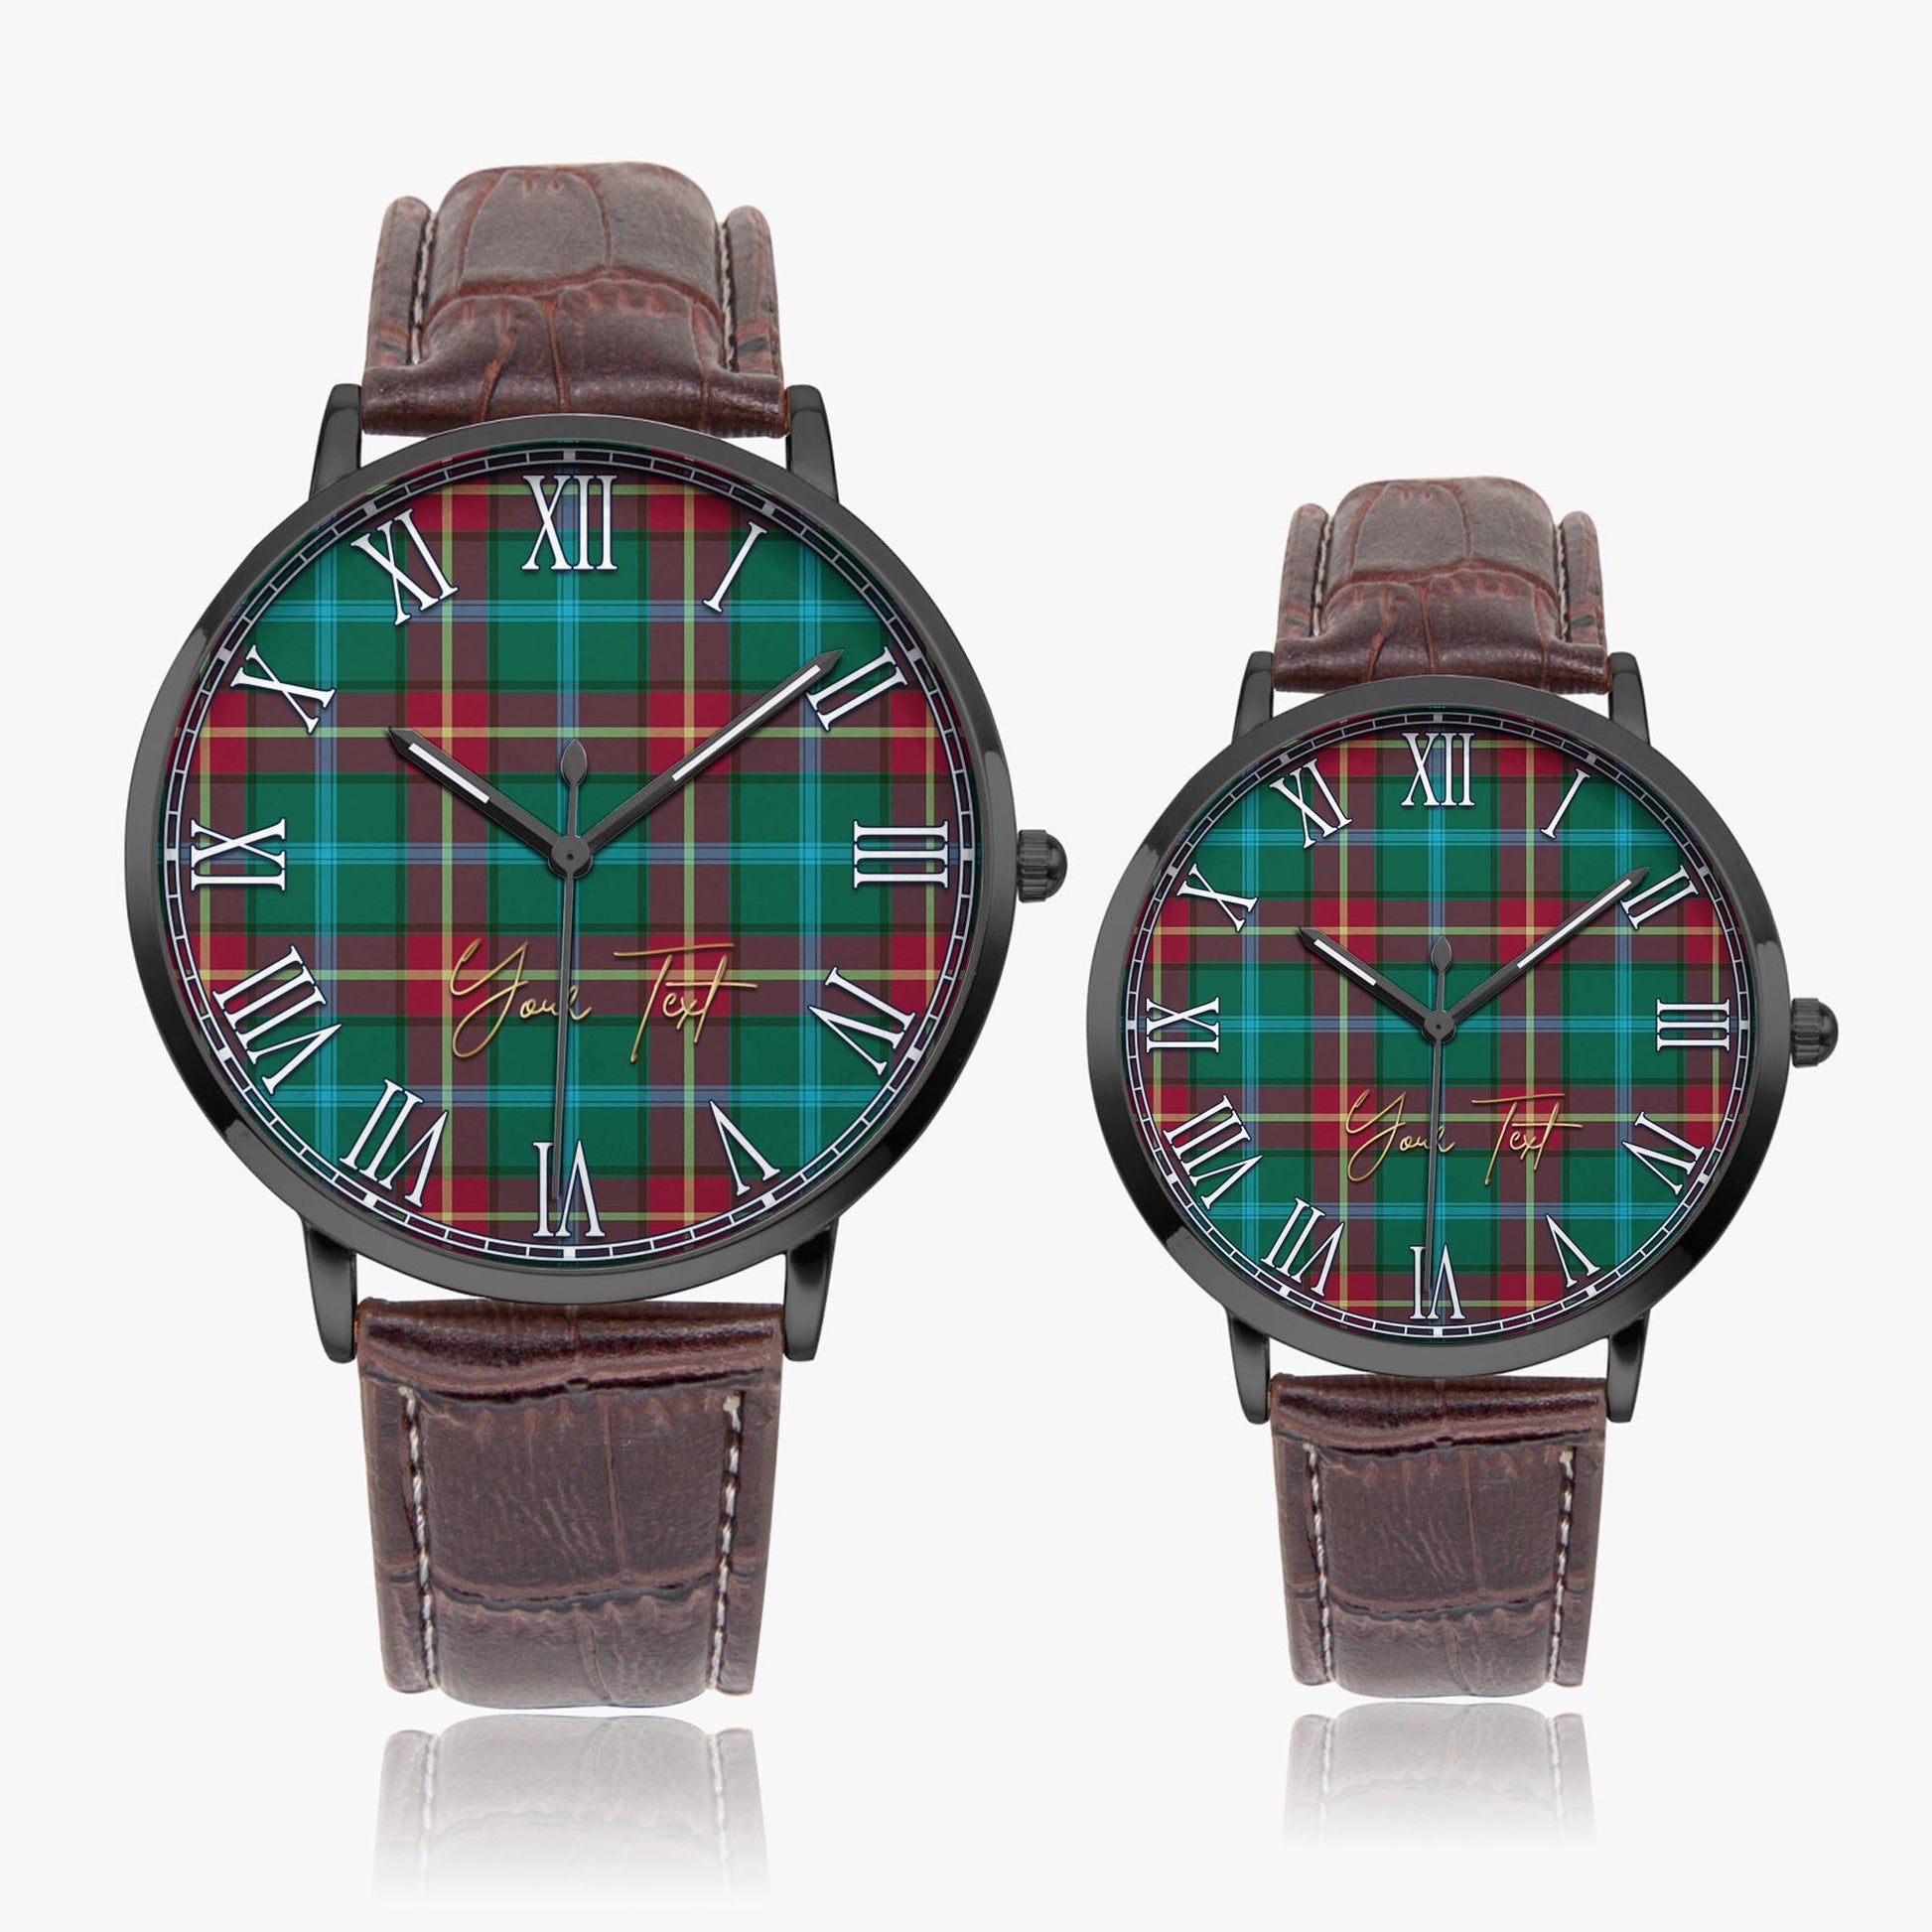 Manitoba Province Canada Tartan Personalized Your Text Leather Trap Quartz Watch Ultra Thin Black Case With Brown Leather Strap - Tartanvibesclothing